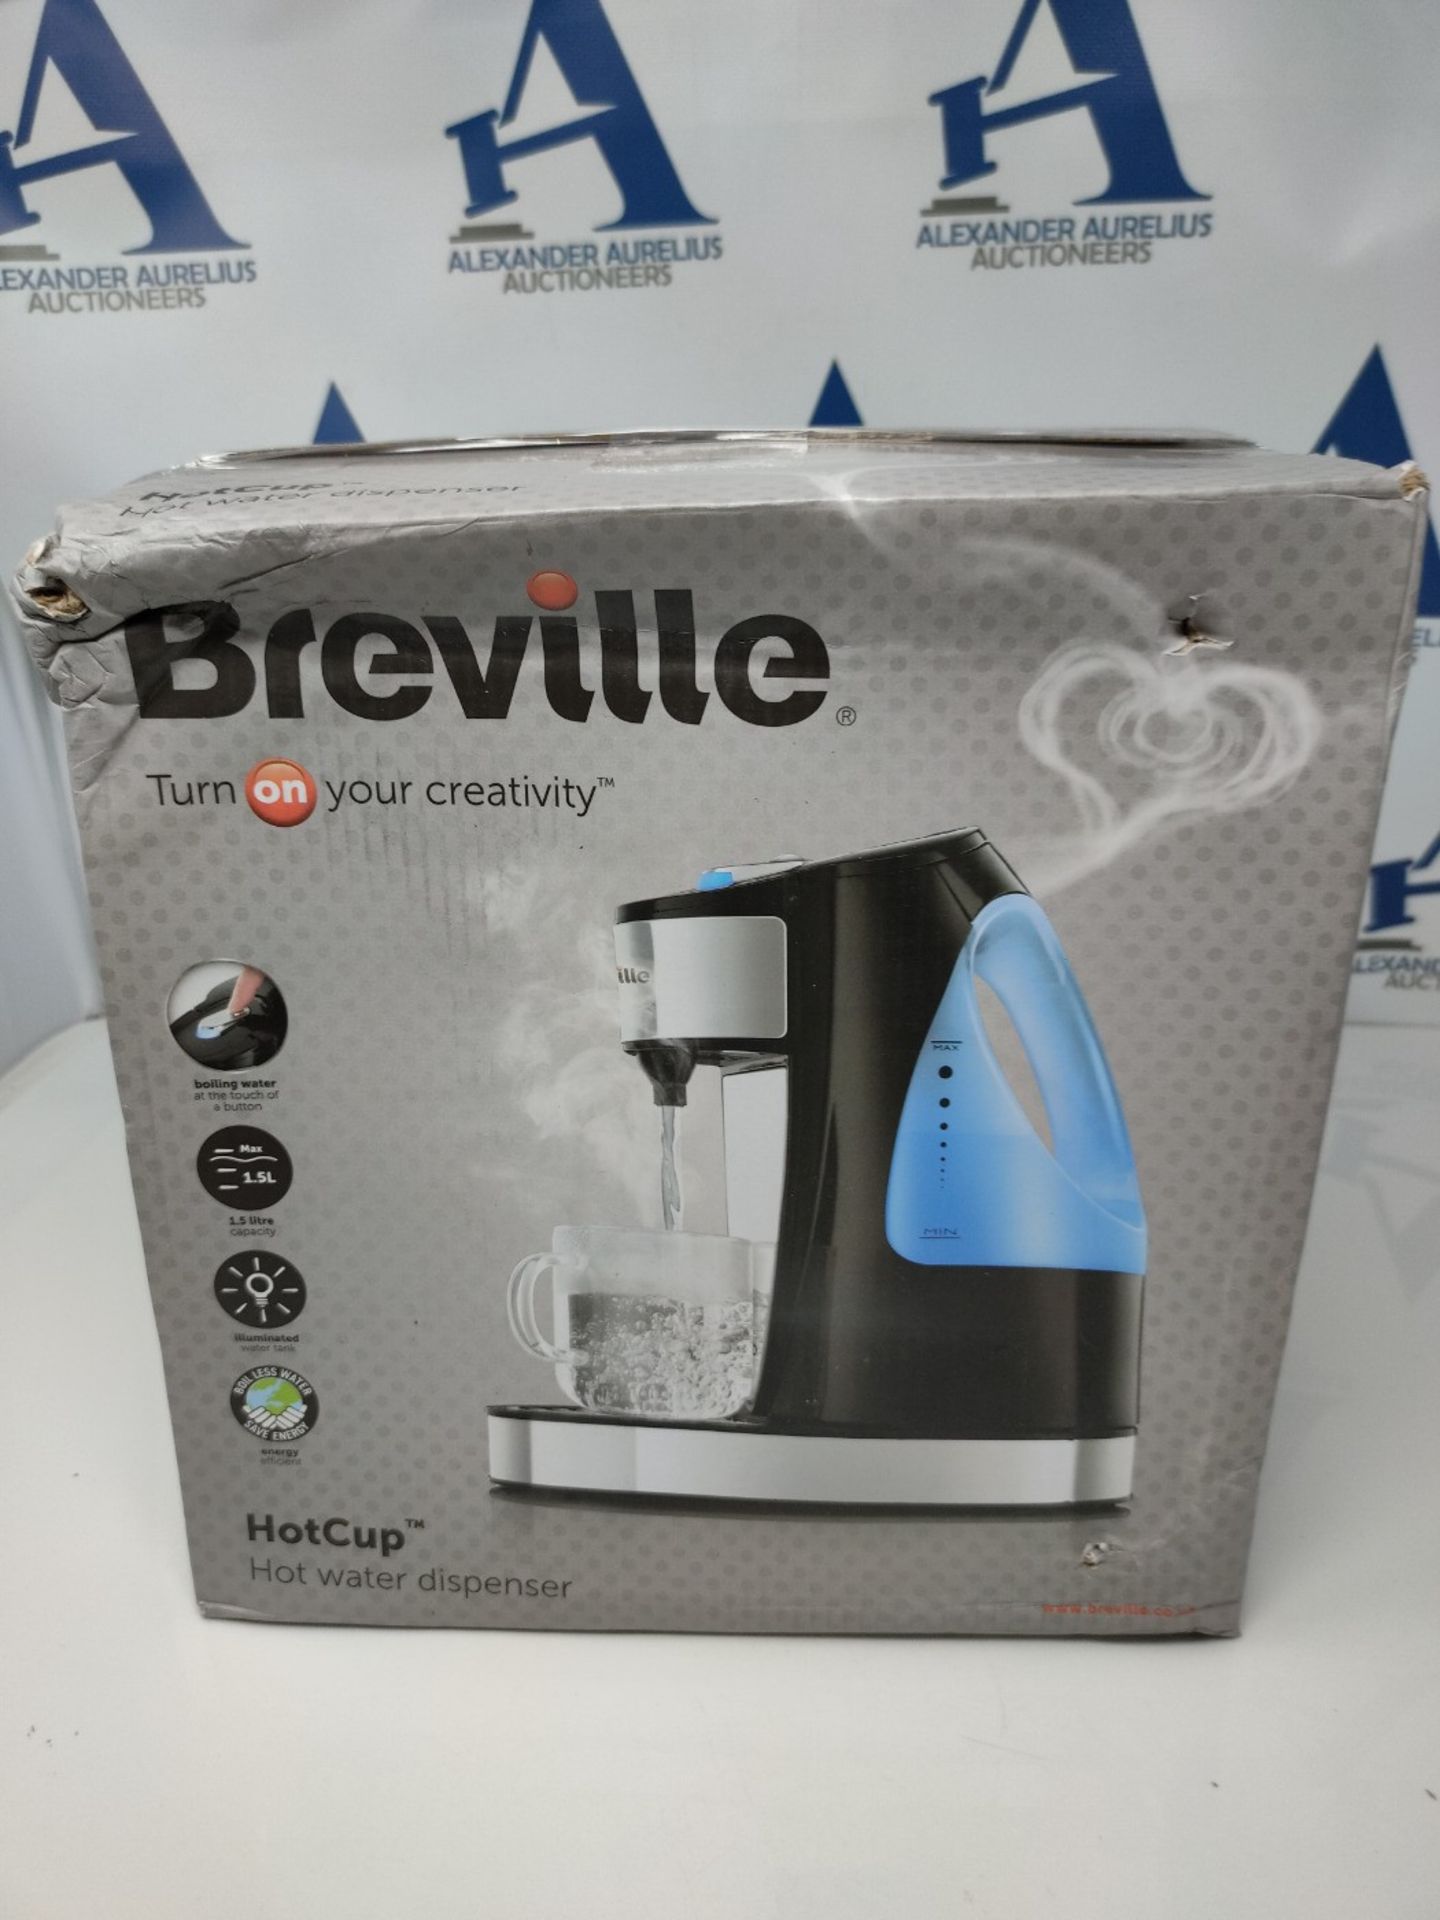 Breville HotCup Hot Water Dispenser | 3kW Fast Boil |1.5L | Energy-Efficient | Gloss B - Image 2 of 3